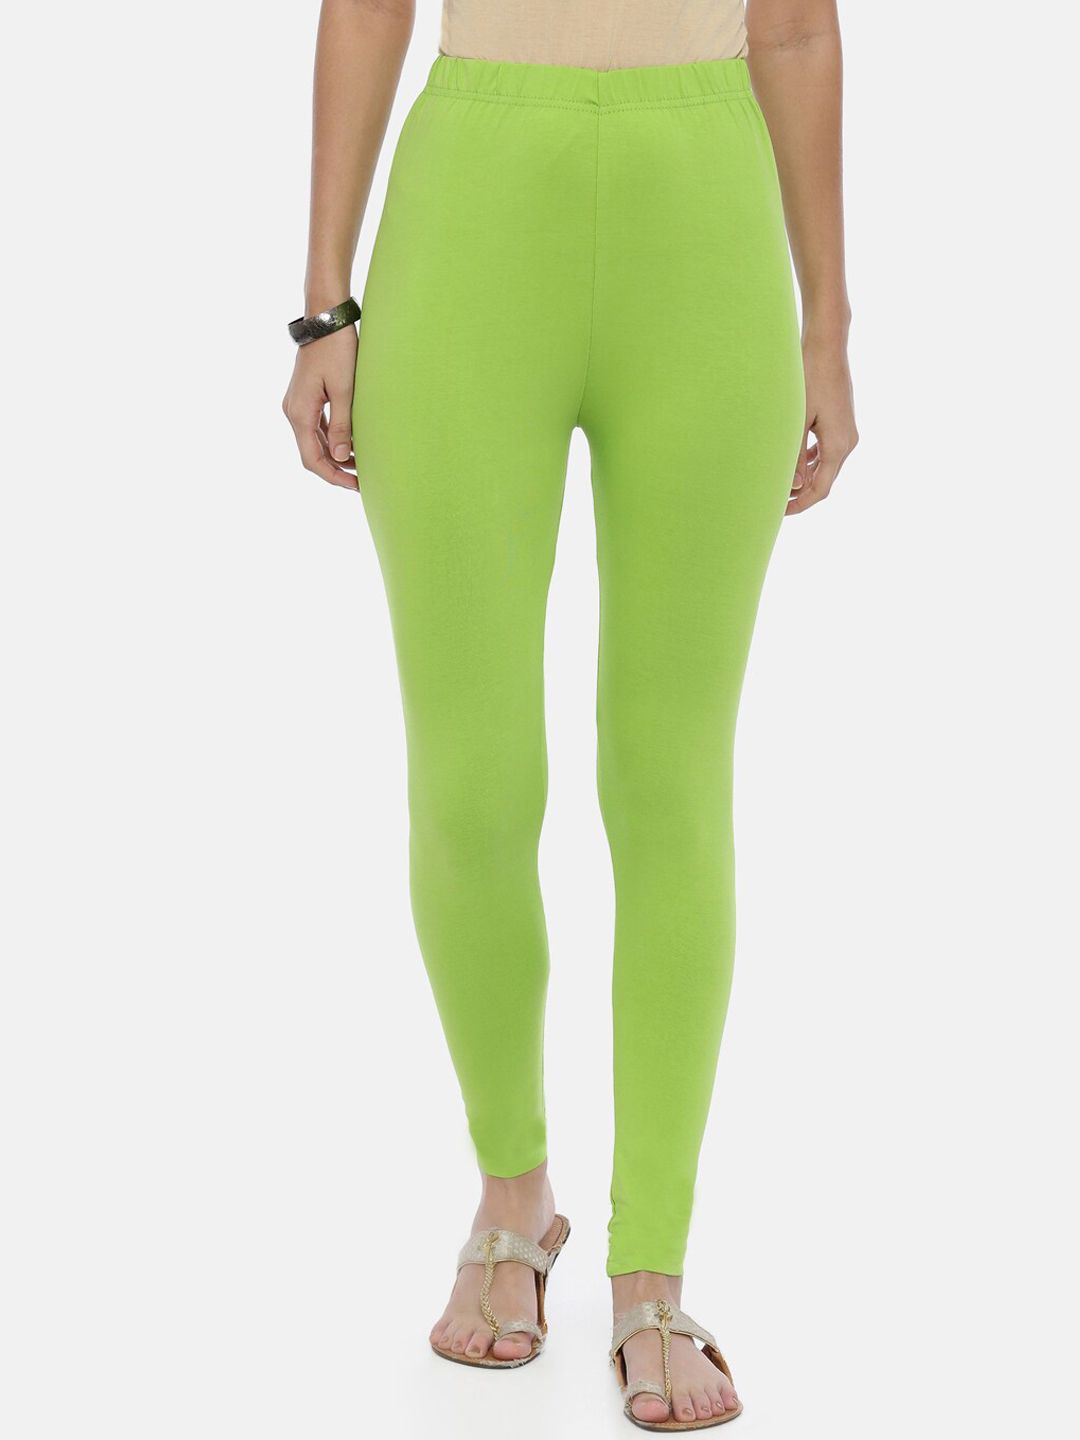 Souchii Women Lime Green Solid Ankle-Length Leggings Price in India